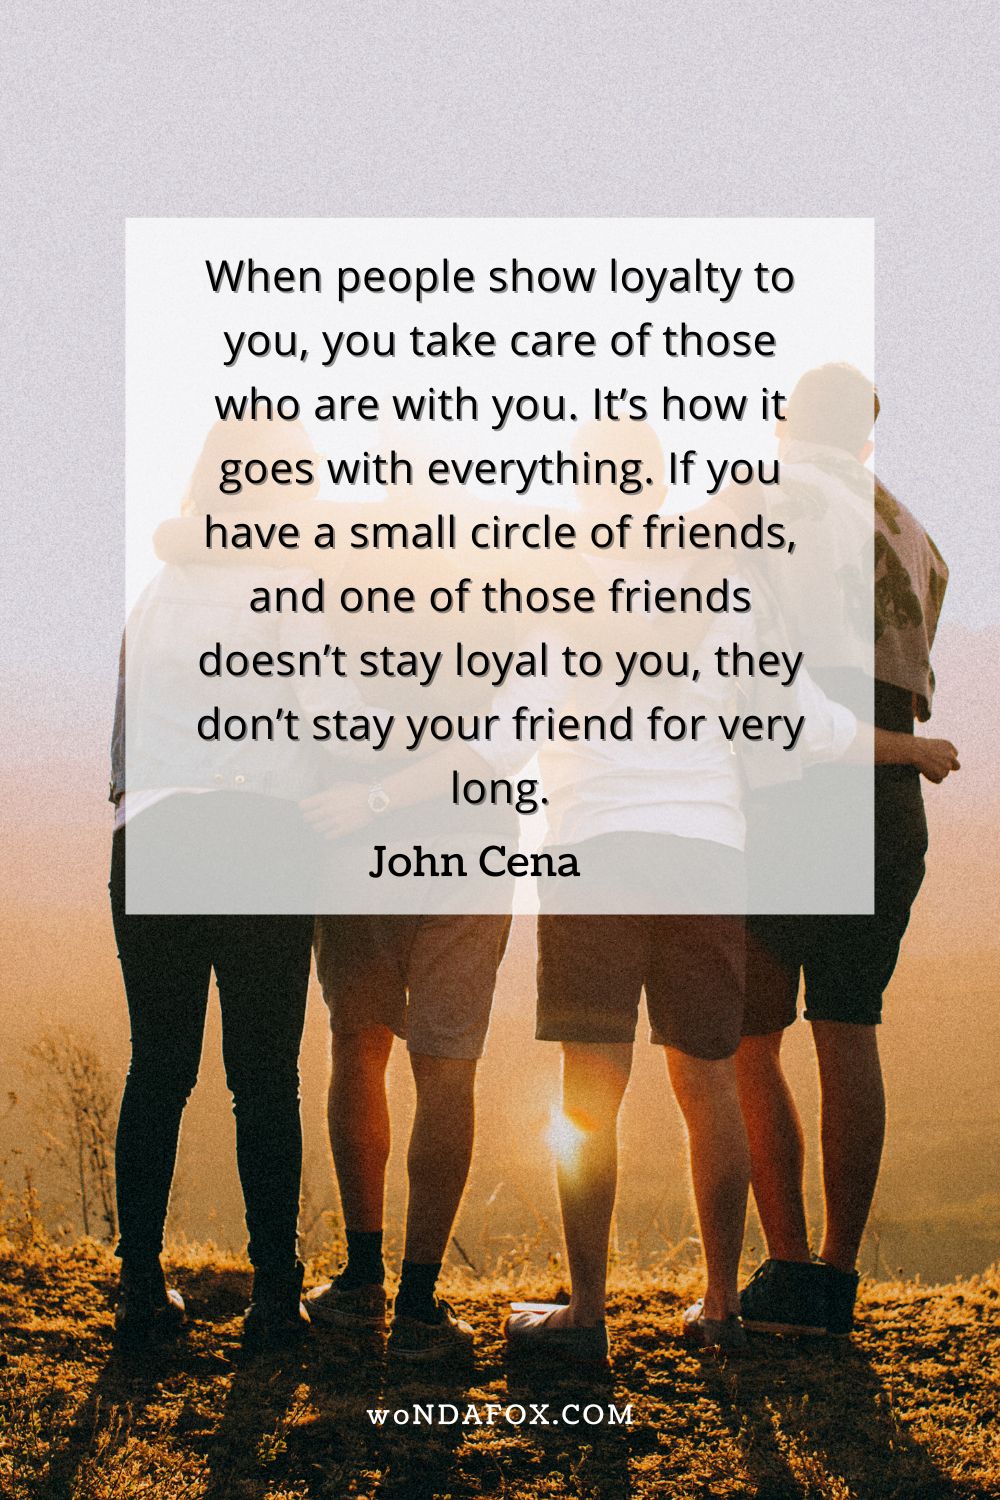 When people show loyalty to you, you take care of those who are with you. It’s how it goes with everything. If you have a small circle of friends, and one of those friends doesn’t stay loyal to you, they don’t stay your friend for very long.” 